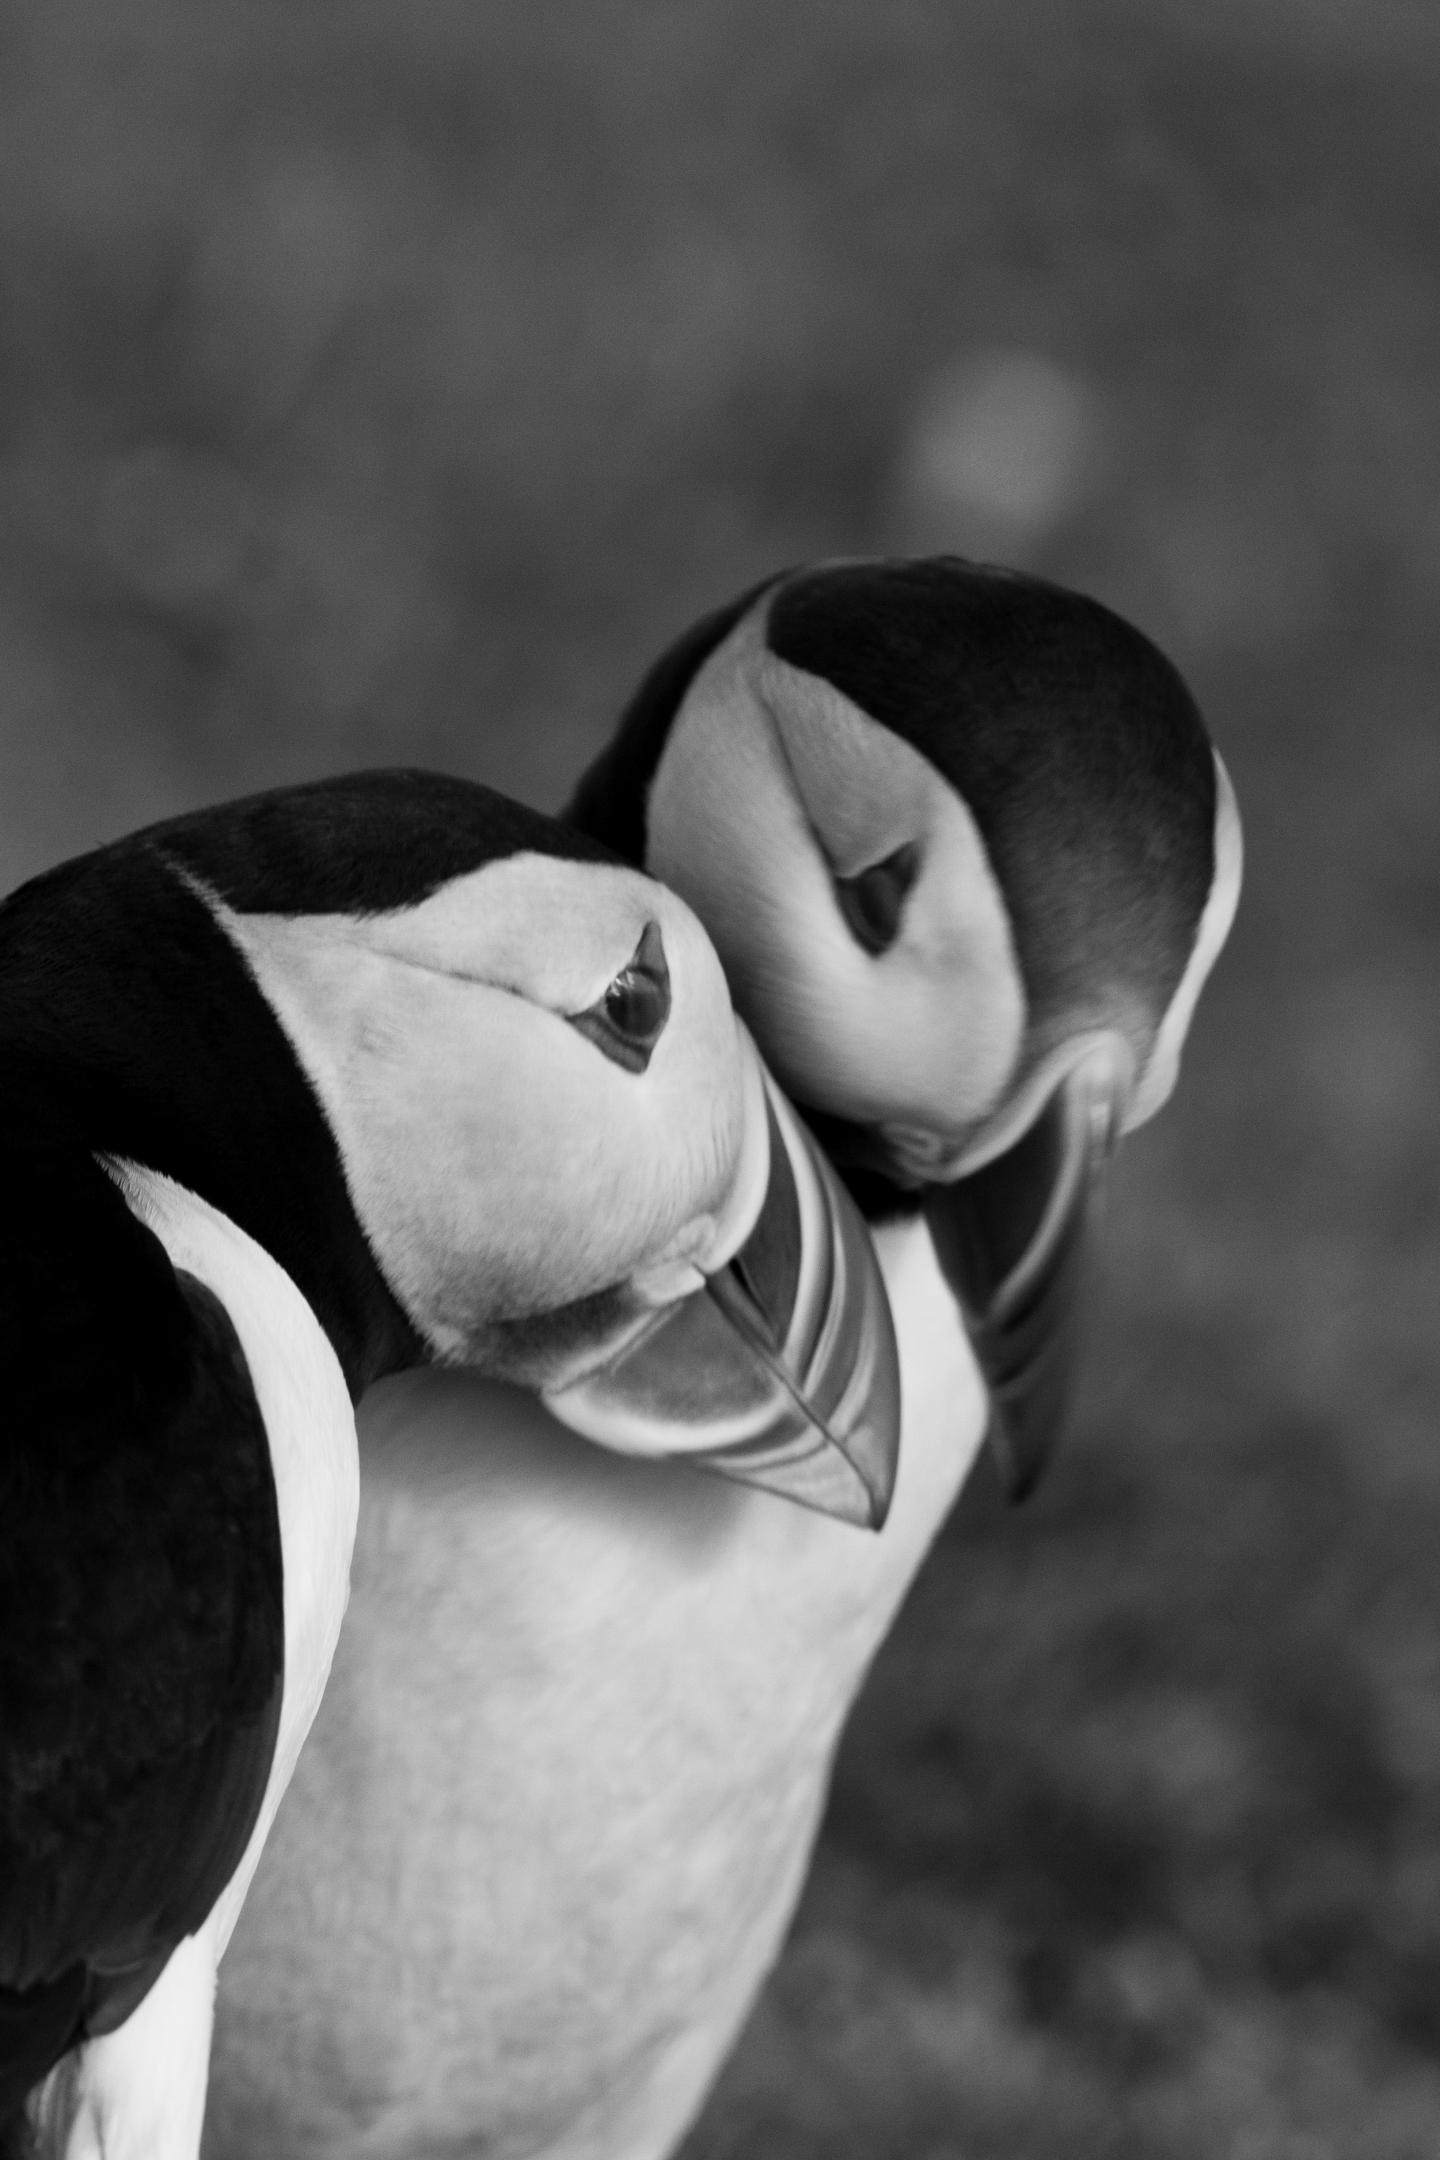 Puffins Are Known For Their Long-Lived, Monogamous, Soulmate Pairings